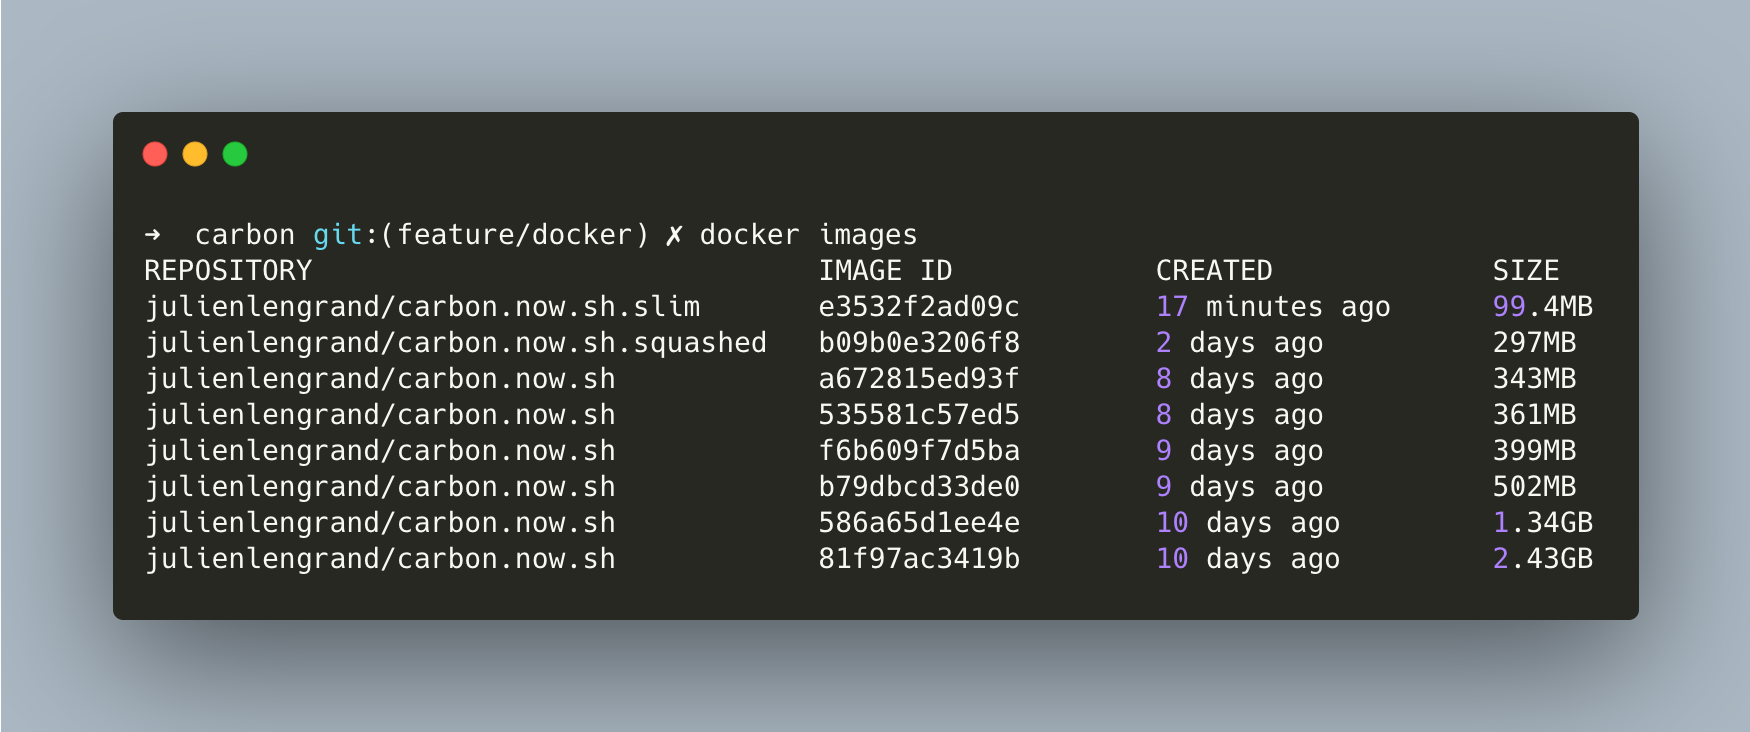 Reducing our Carbon Docker image size further!